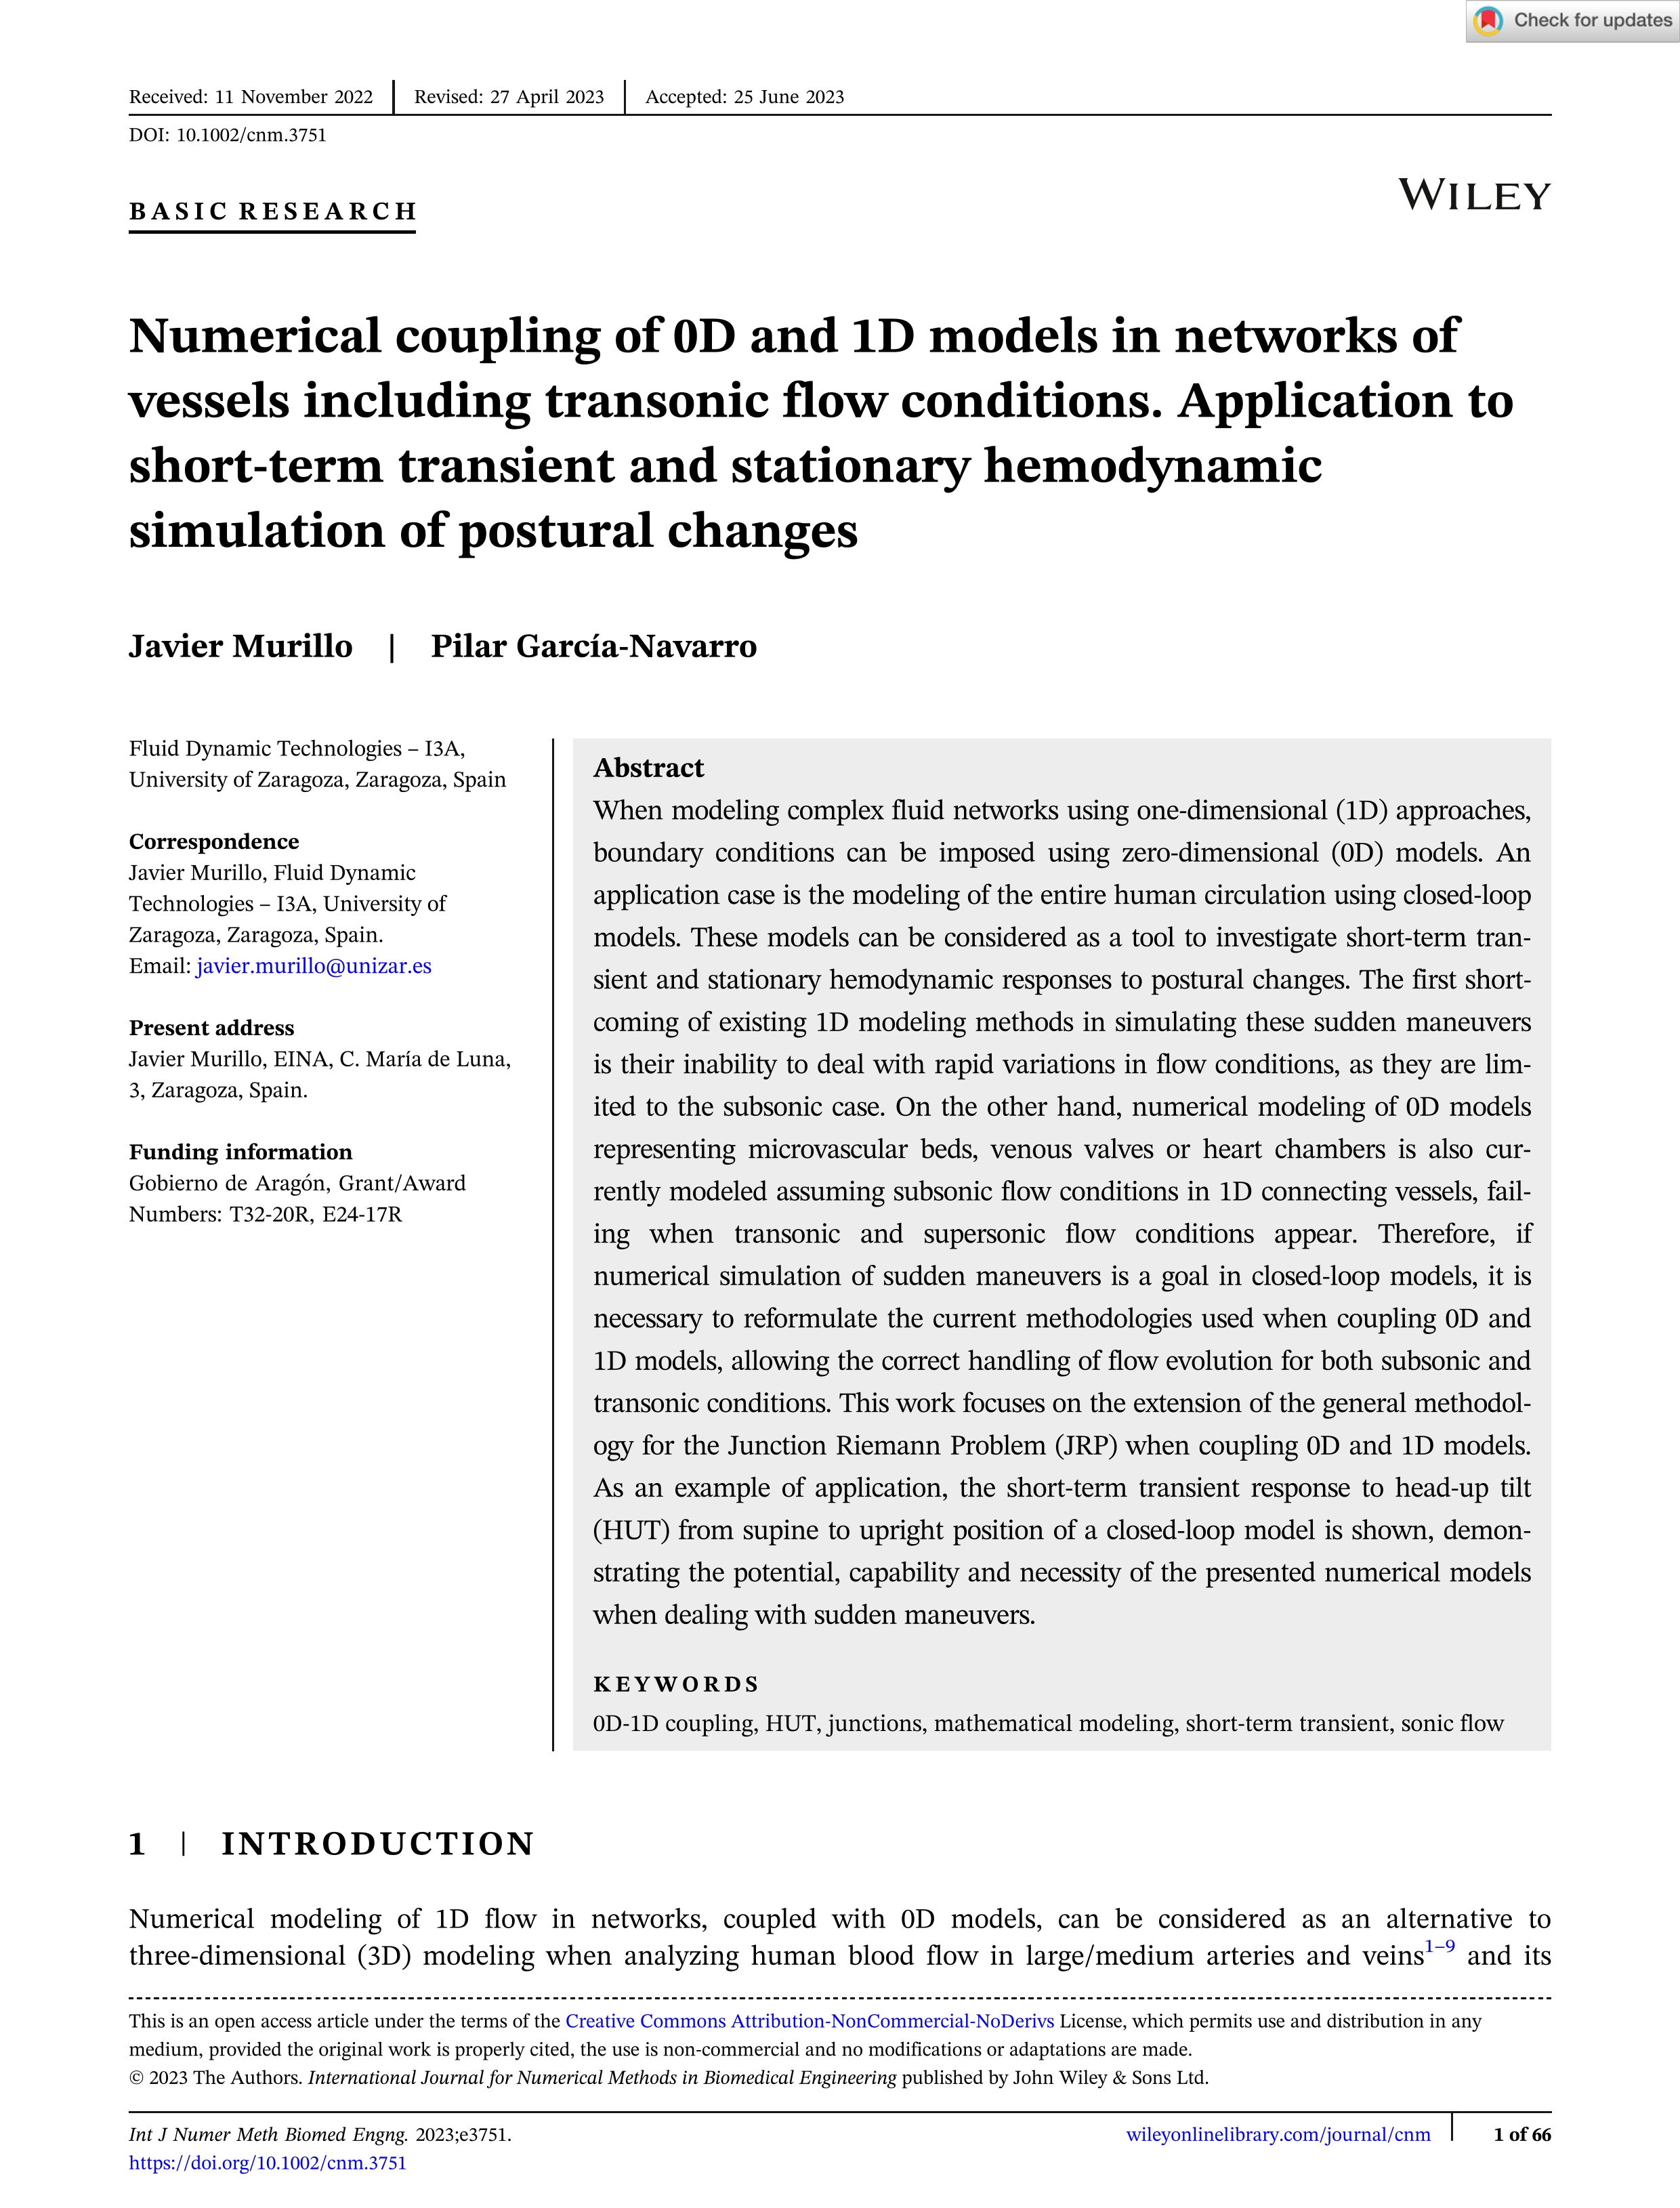 Numerical coupling of 0D and 1D models in networks of vessels including transonic flow conditions. Application to short-term transient and stationary hemodynamic simulation of postural changes